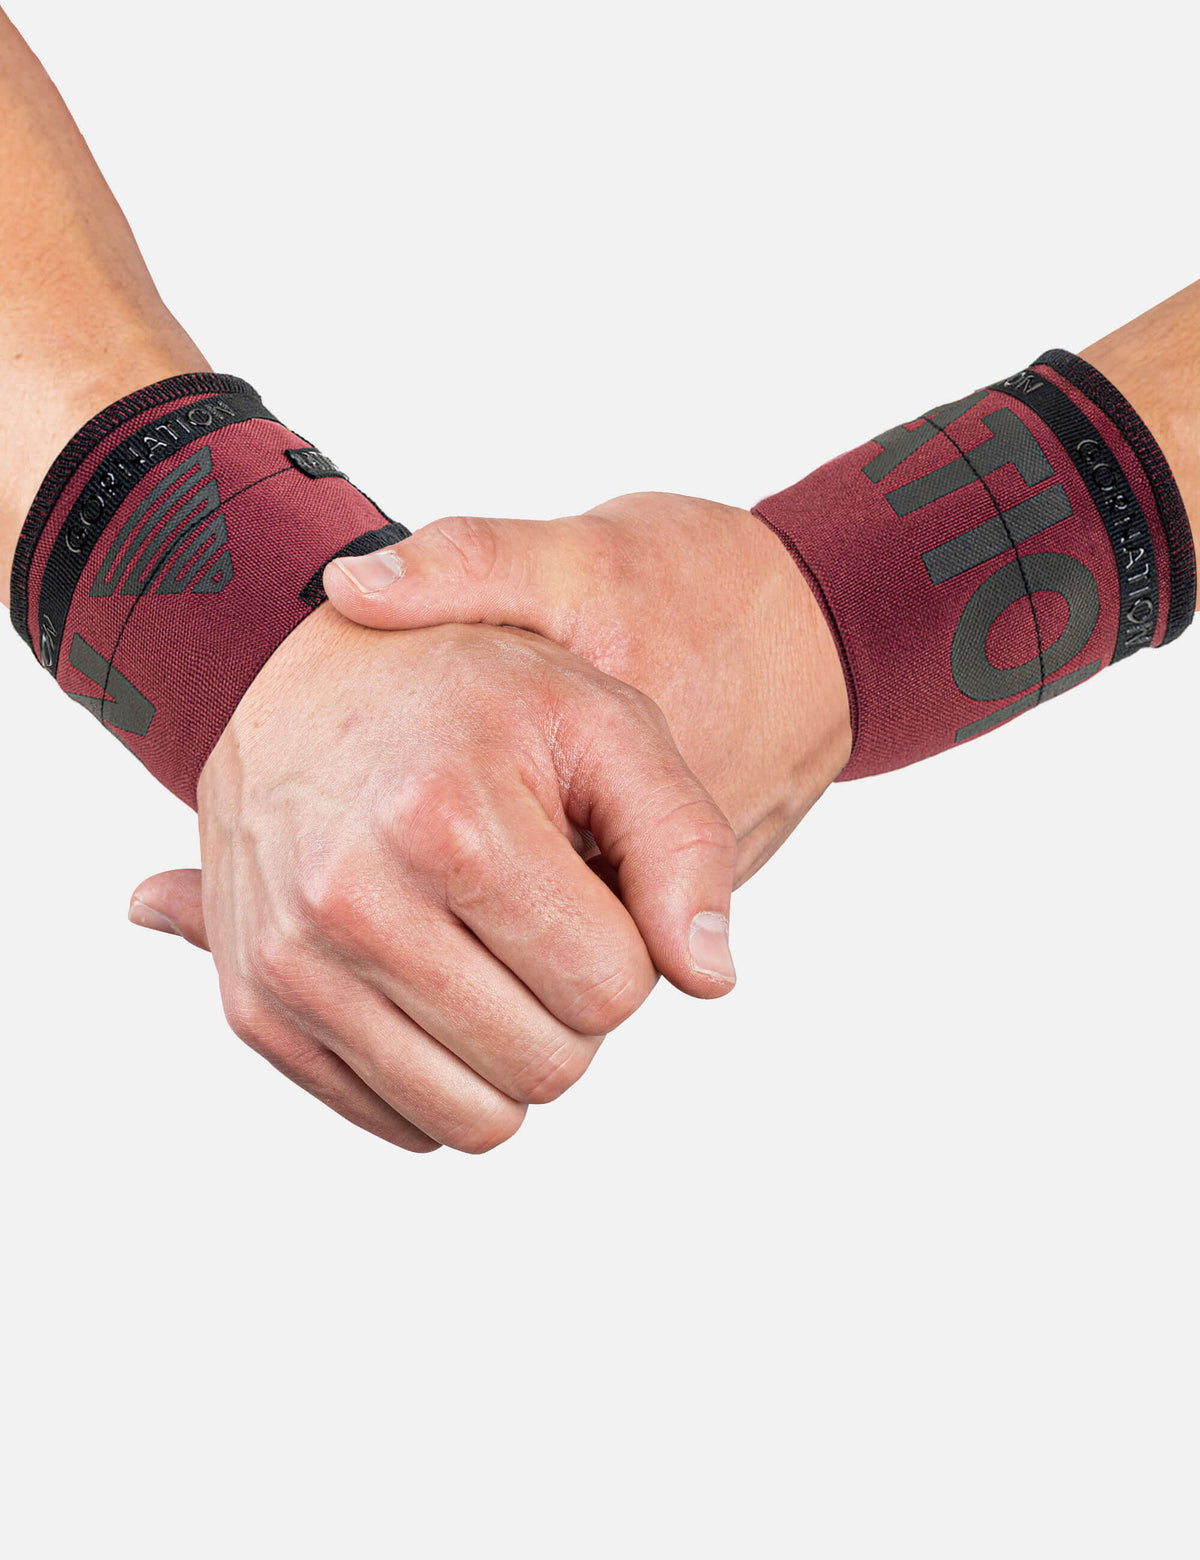 Burgundy Gornation Wrist wraps with tight fit, adjustable wristband for wrist support and injury prevention